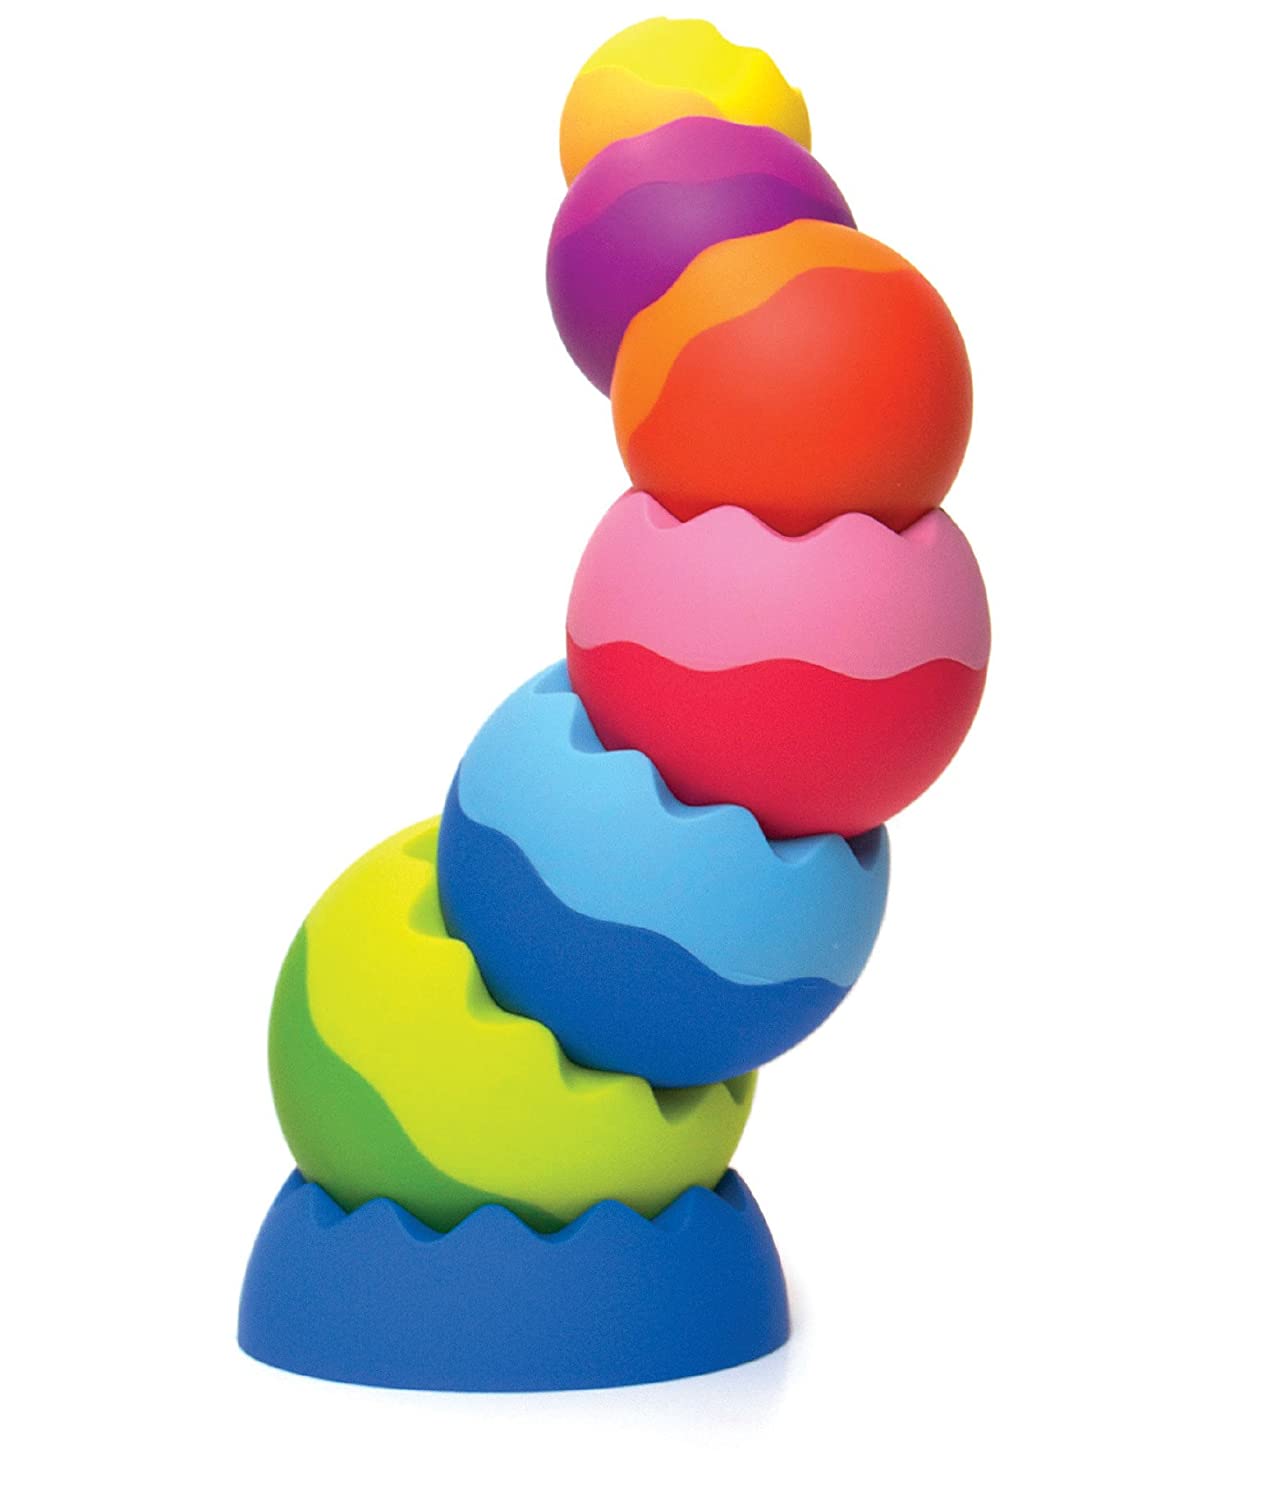 Top 9 Best Baby Stacking Toys Reviews in 2023 7